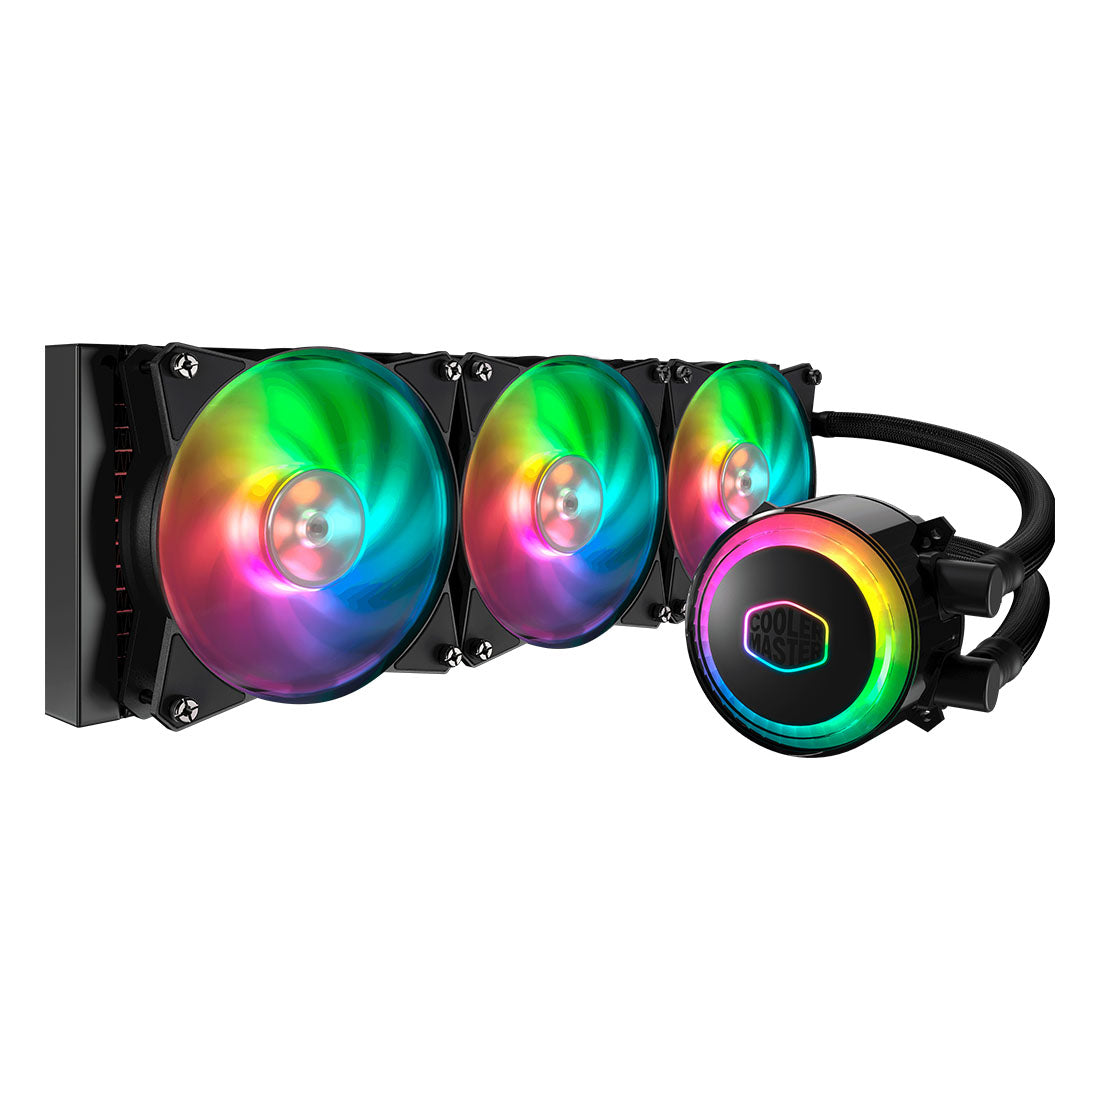 CoolerMaster MasterLiquid ML360R RGB with 360mm Radiator and Exclusive Wired ARGB Controller